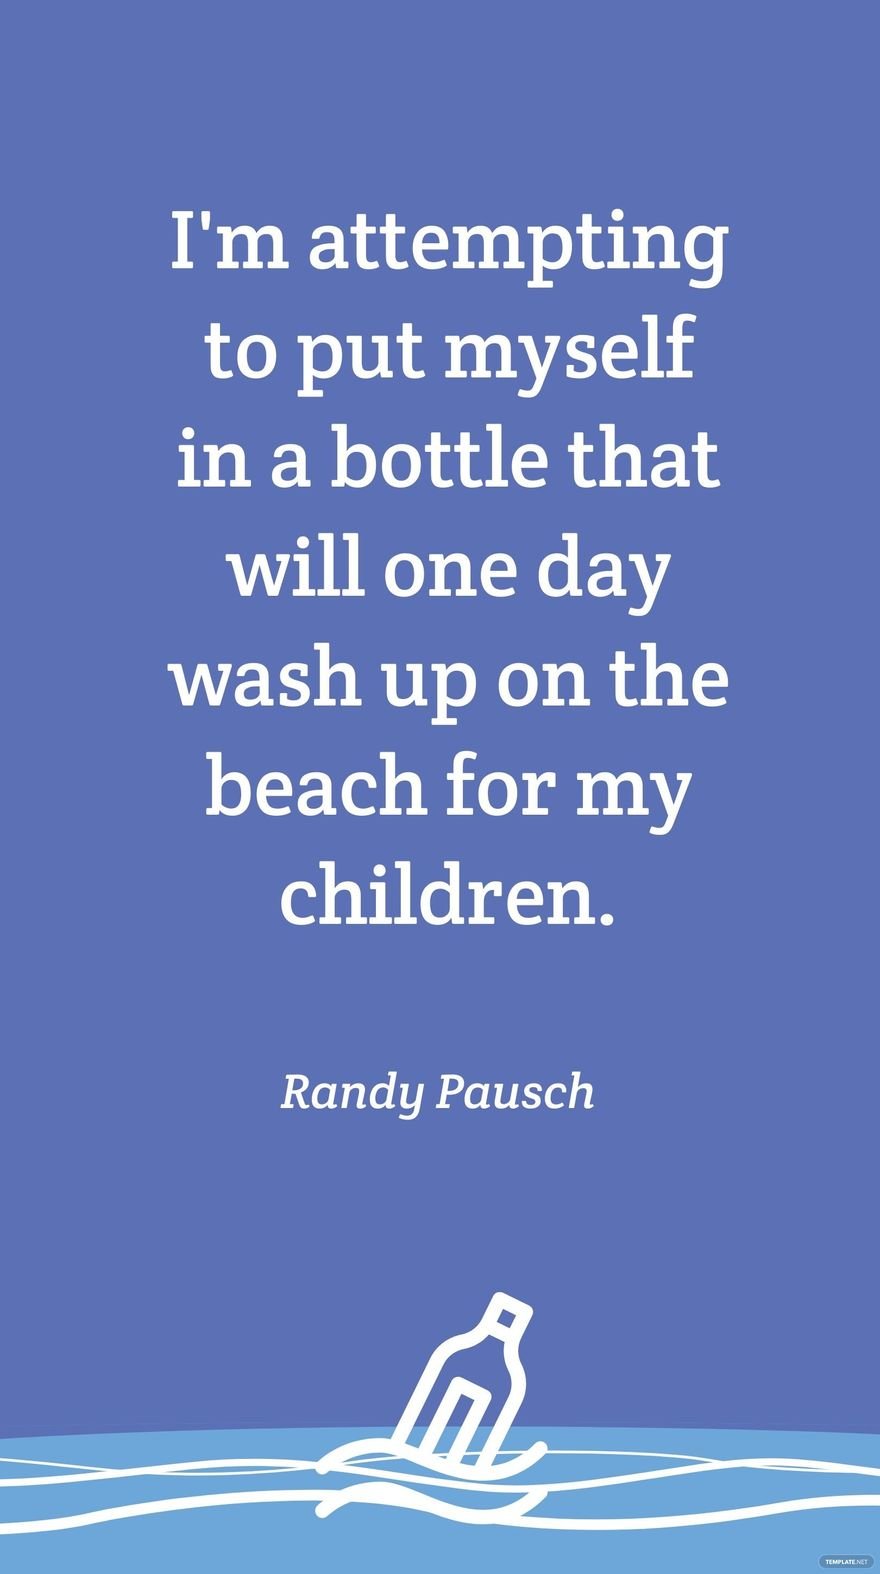 Free Randy Pausch - I'm attempting to put myself in a bottle that will one day wash up on the beach for my children. in JPG